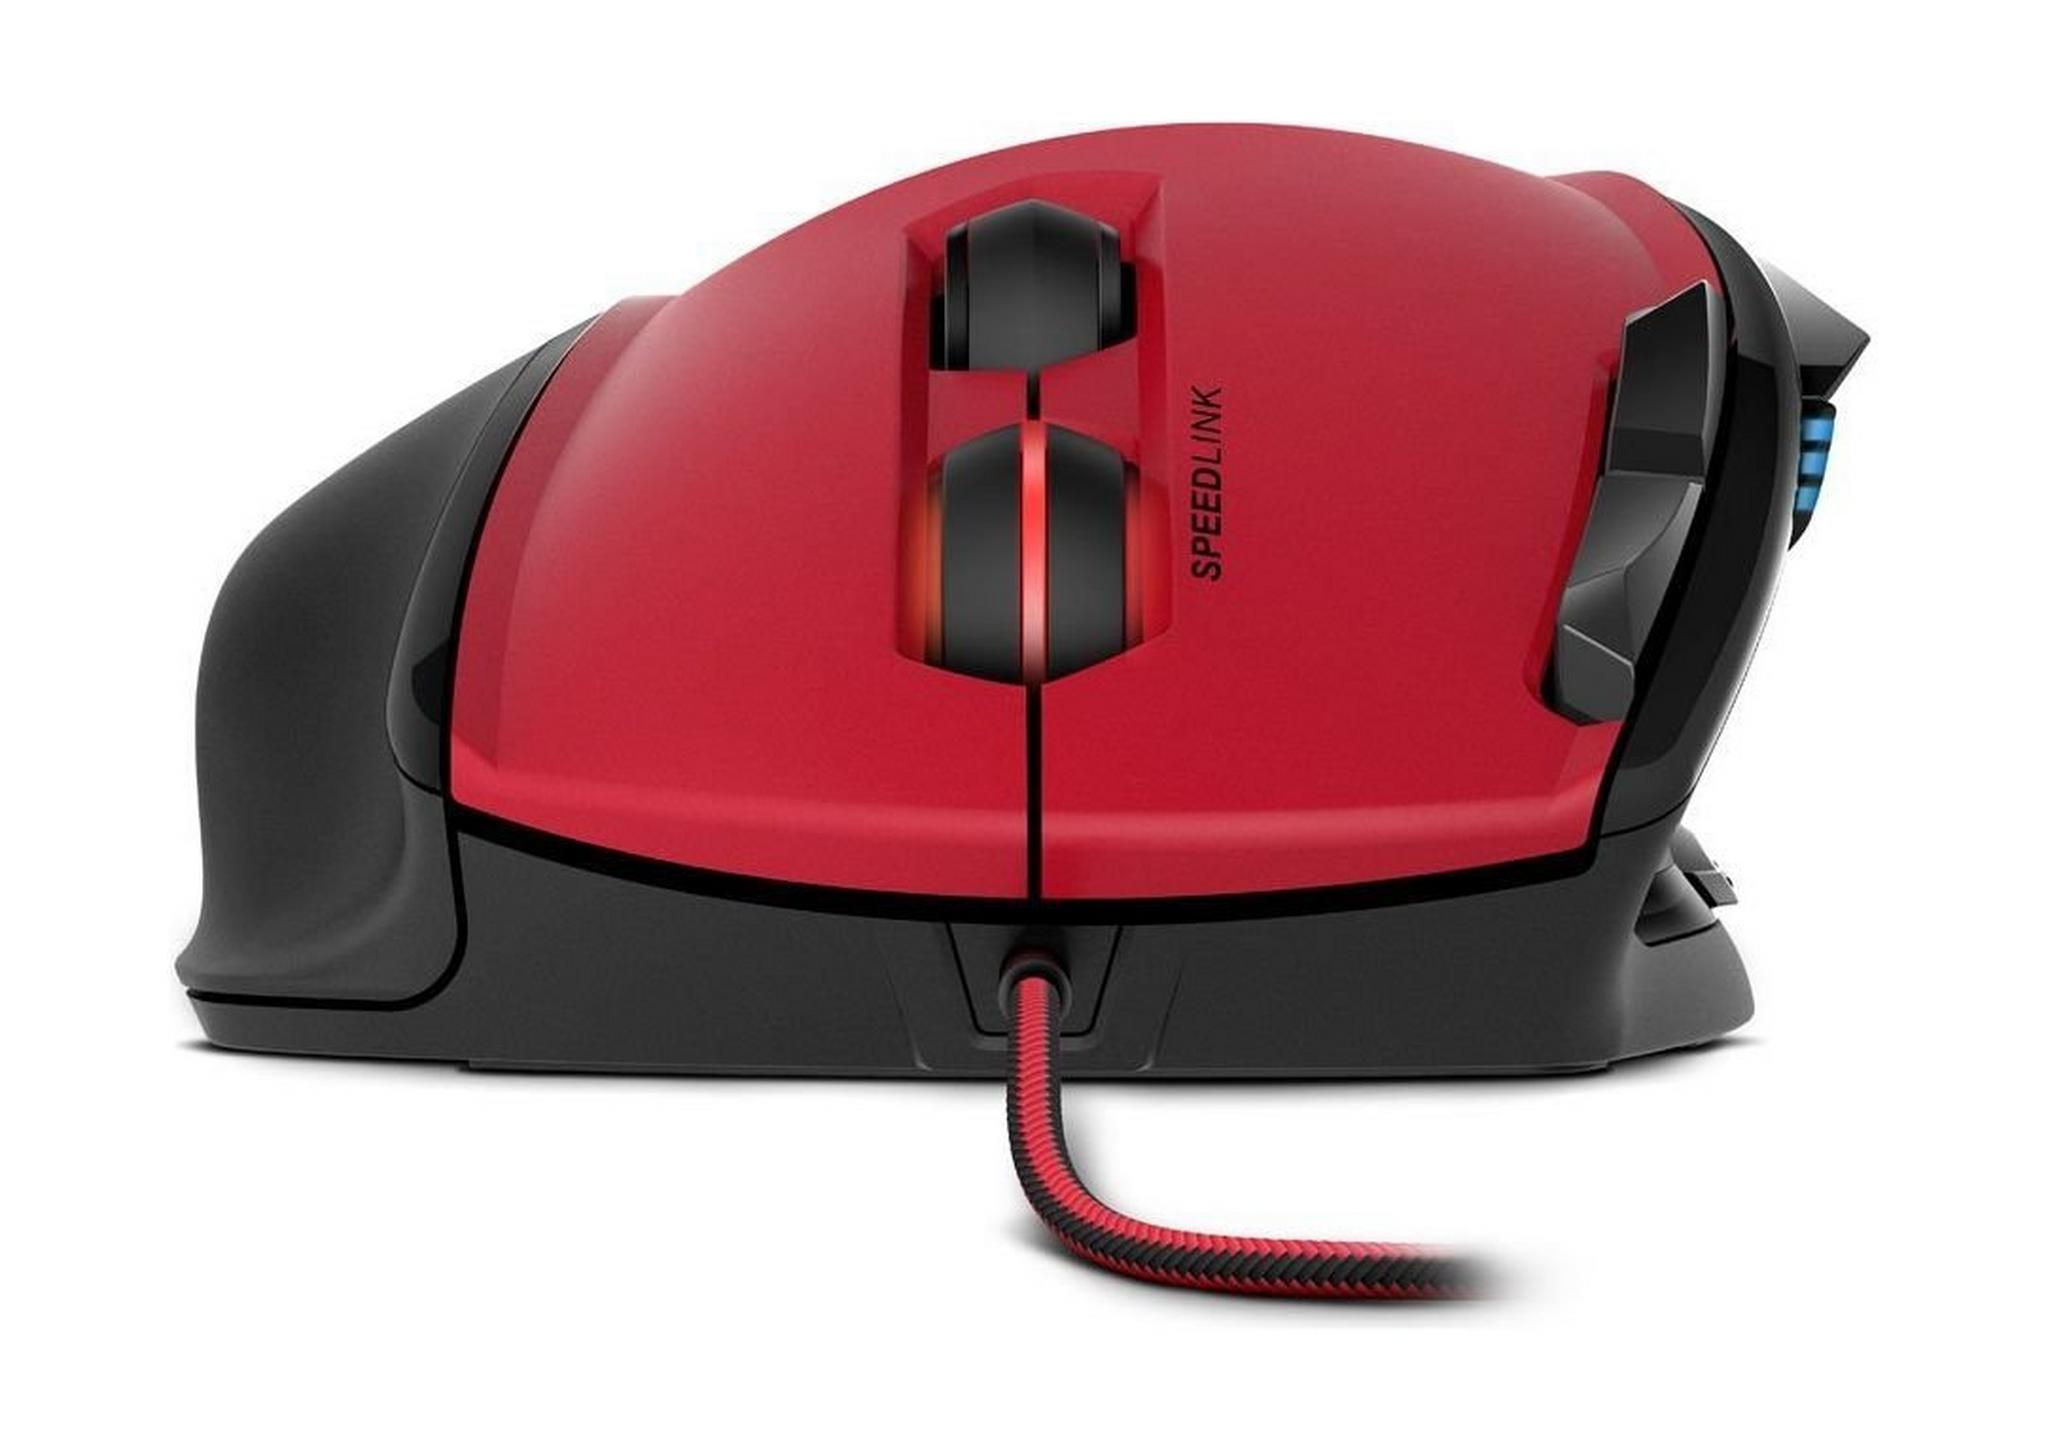 Speedlink Scelus Wired Optical Gaming Mouse - Red/Black